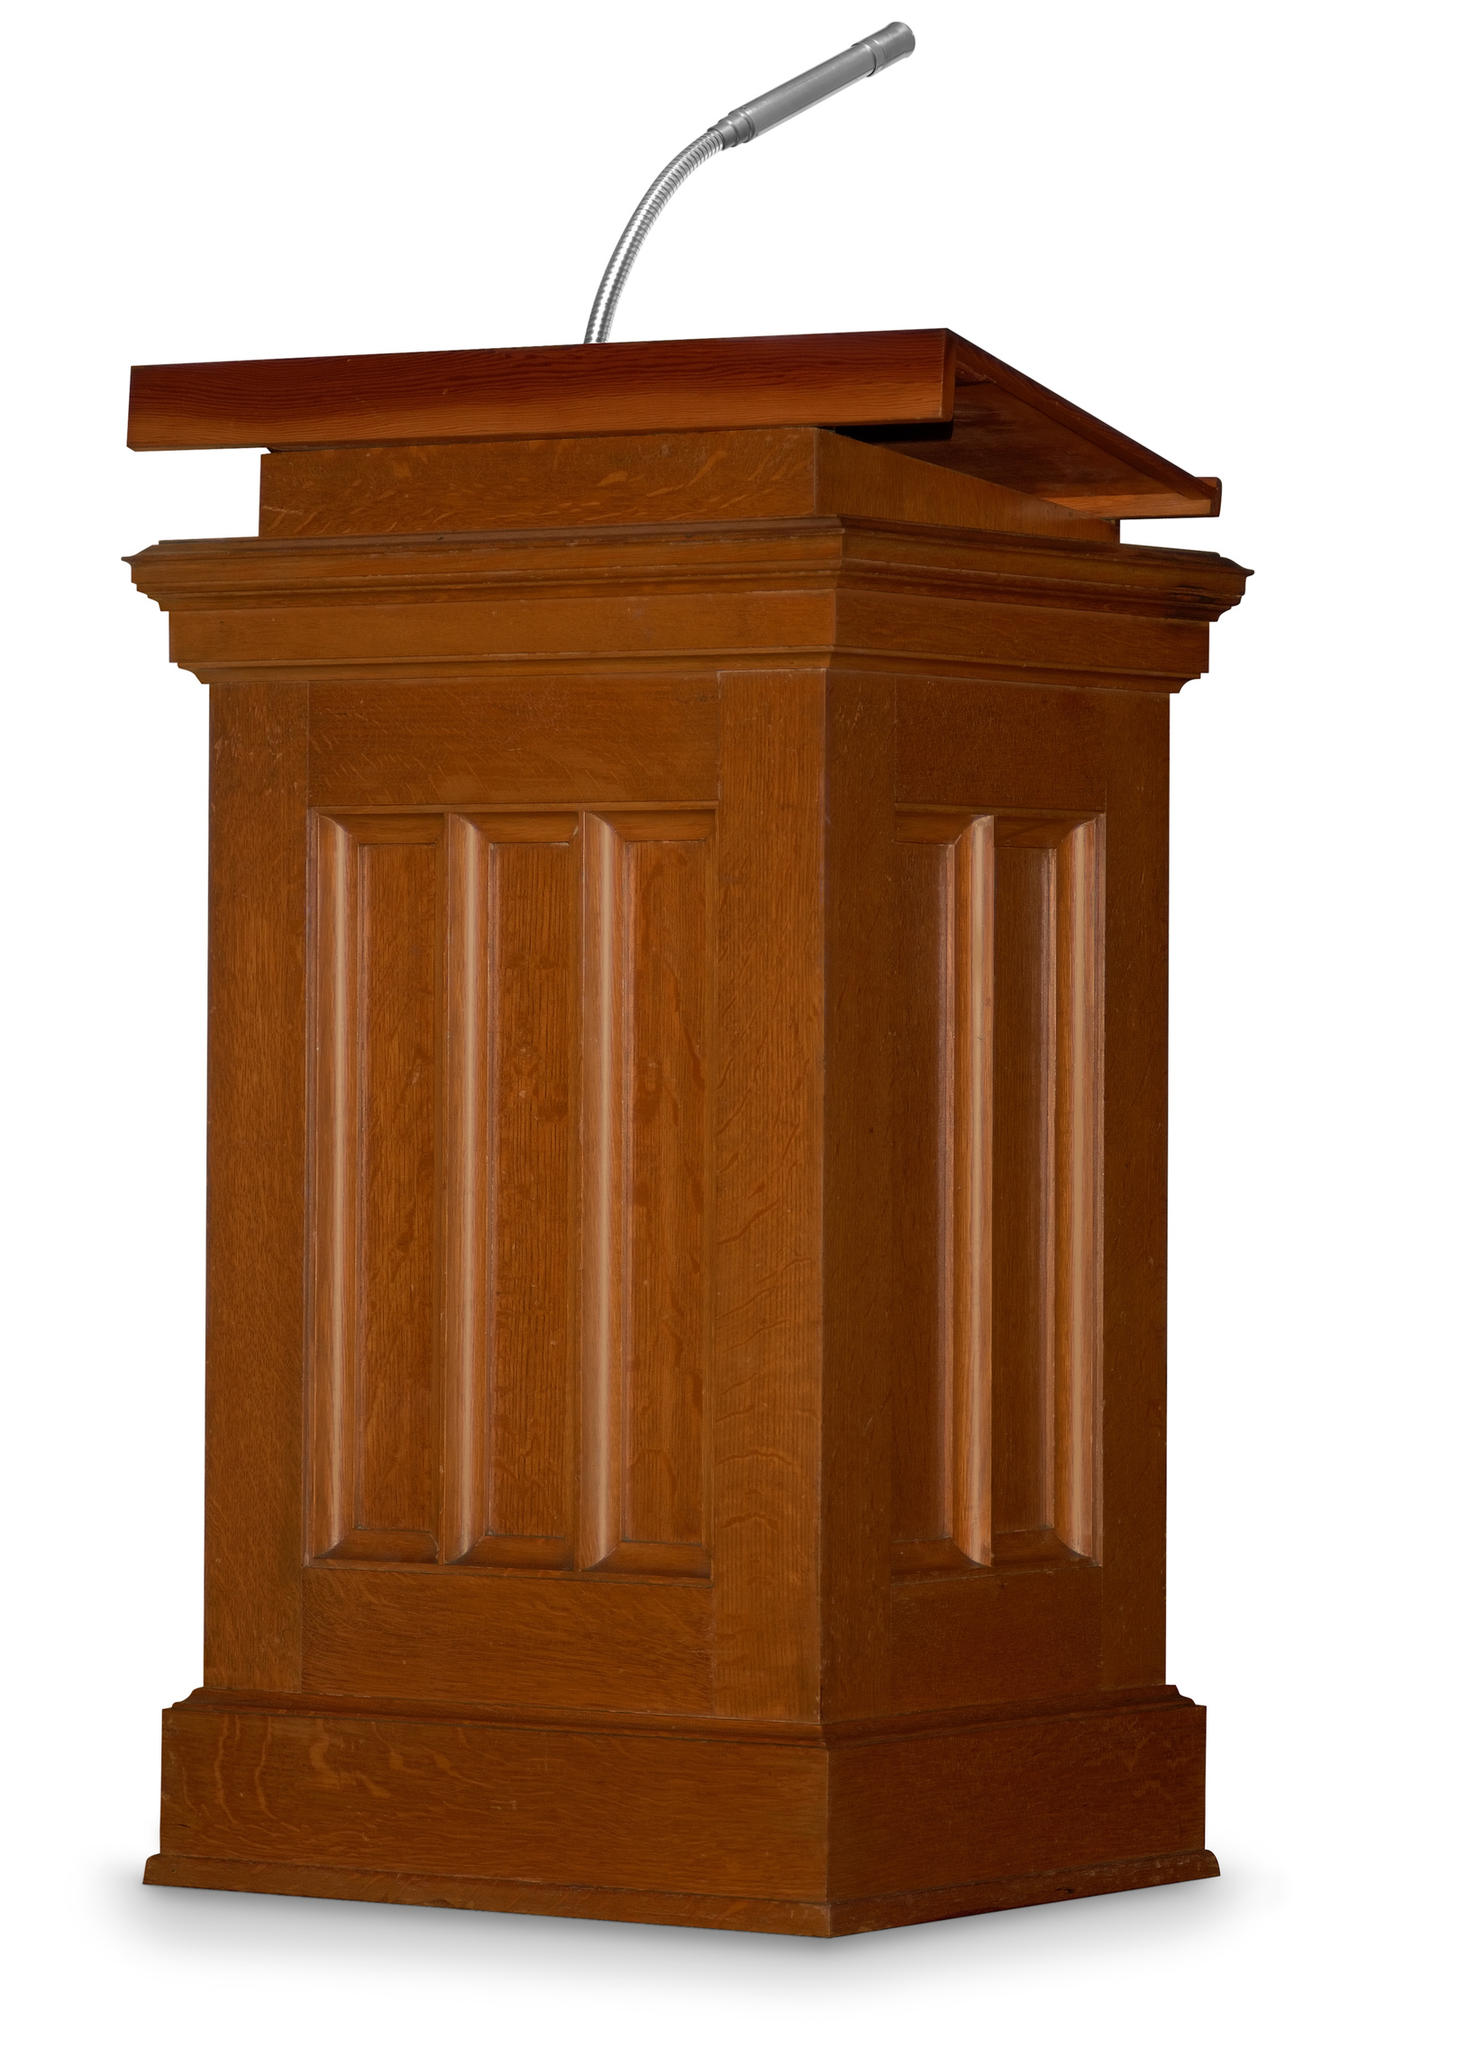 Oak Podium Isolated On White Background With Microphone   The